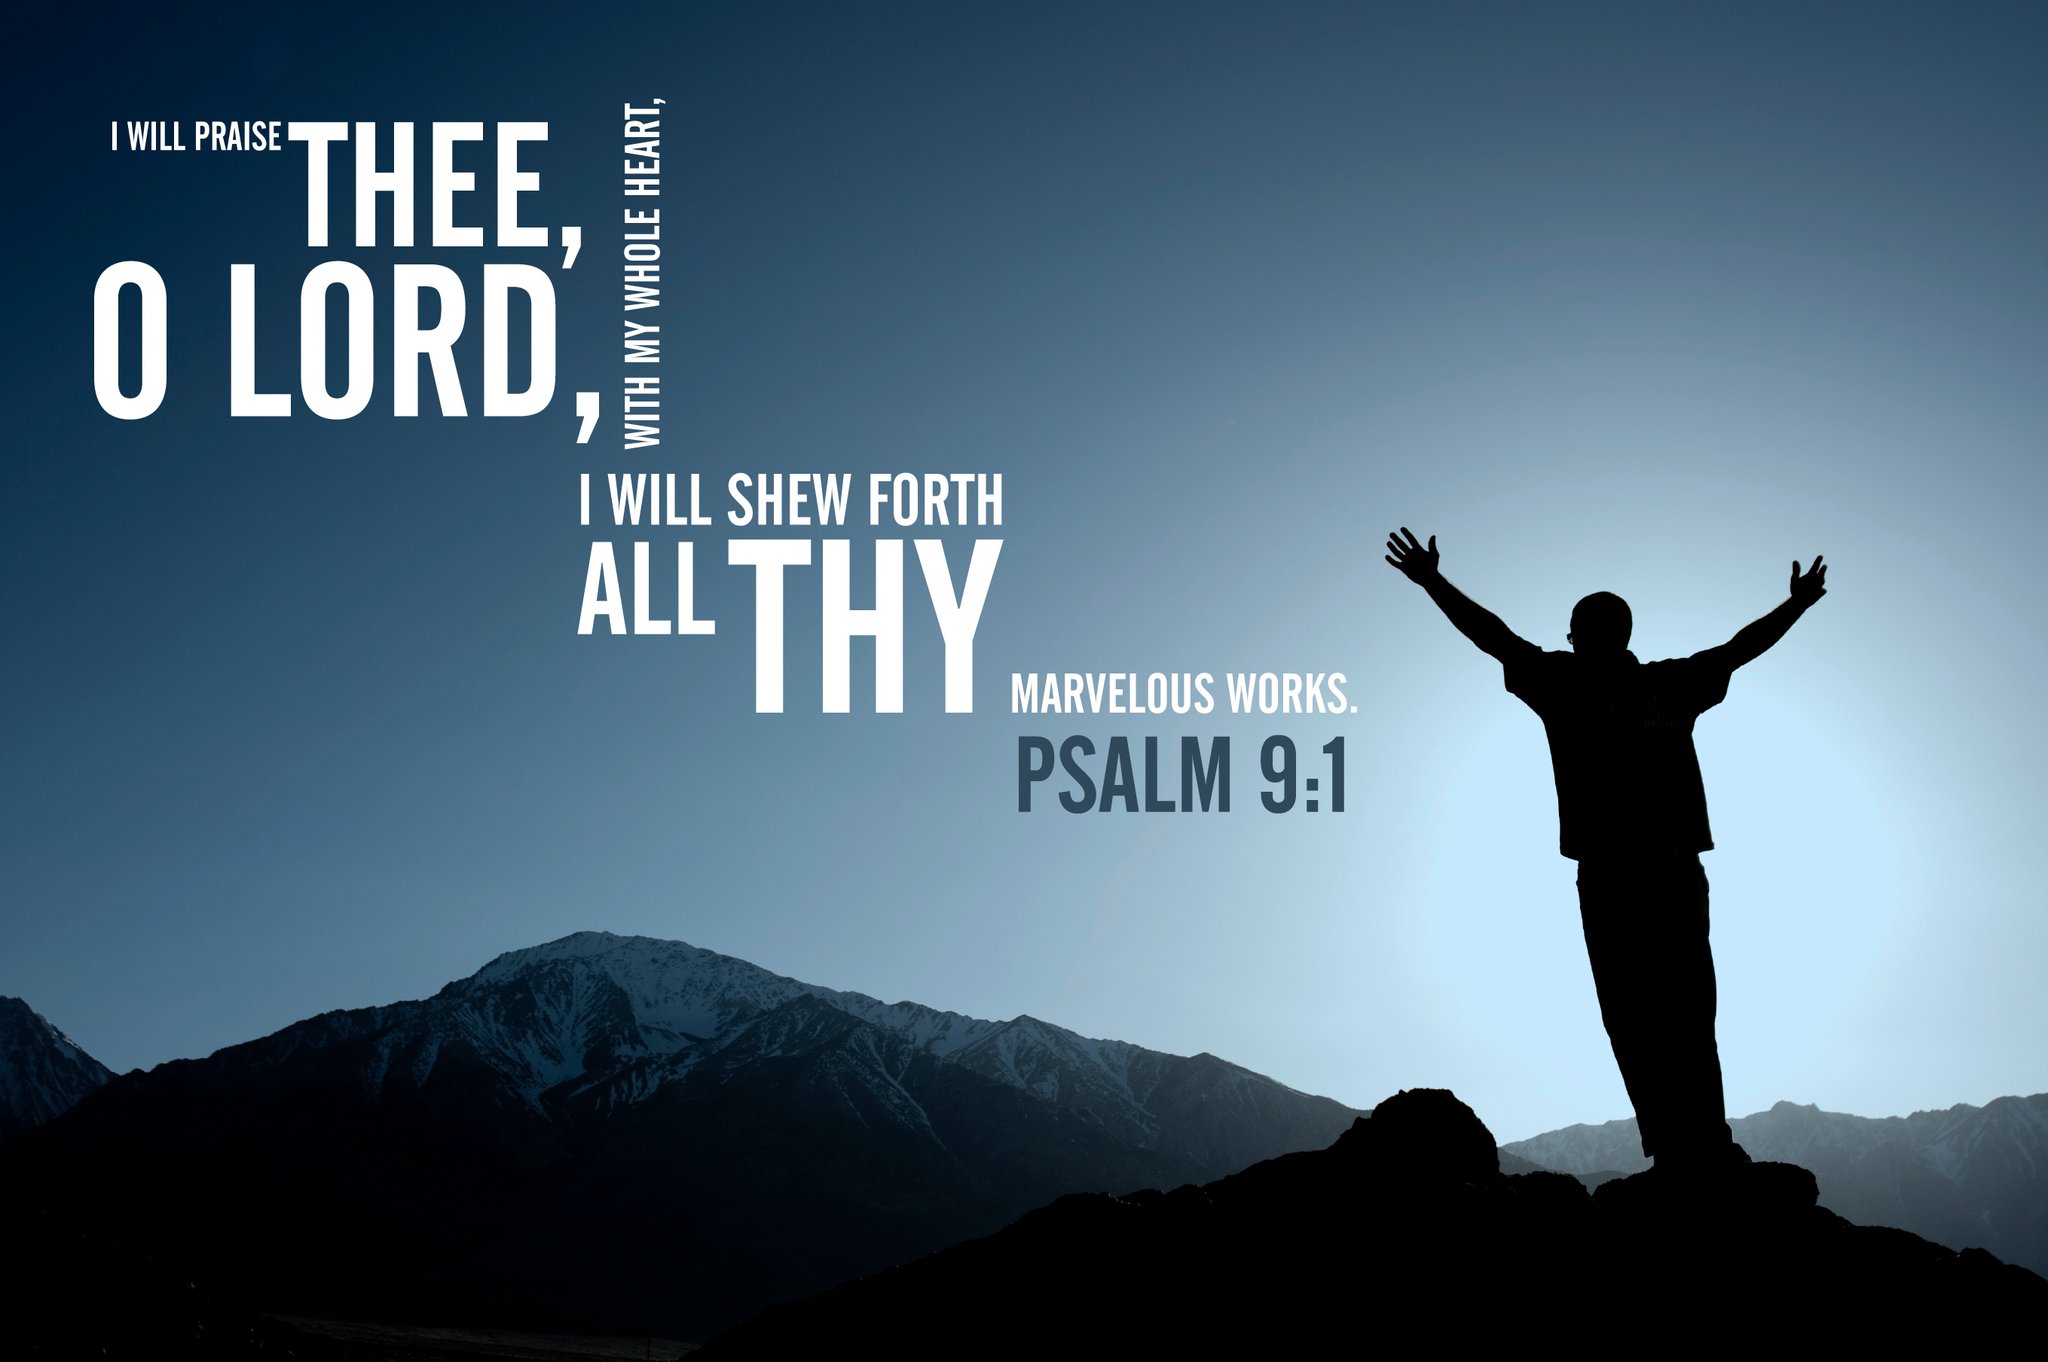  Praise The Lord Wallpaper   Christian Wallpapers and Backgrounds 2048x1362